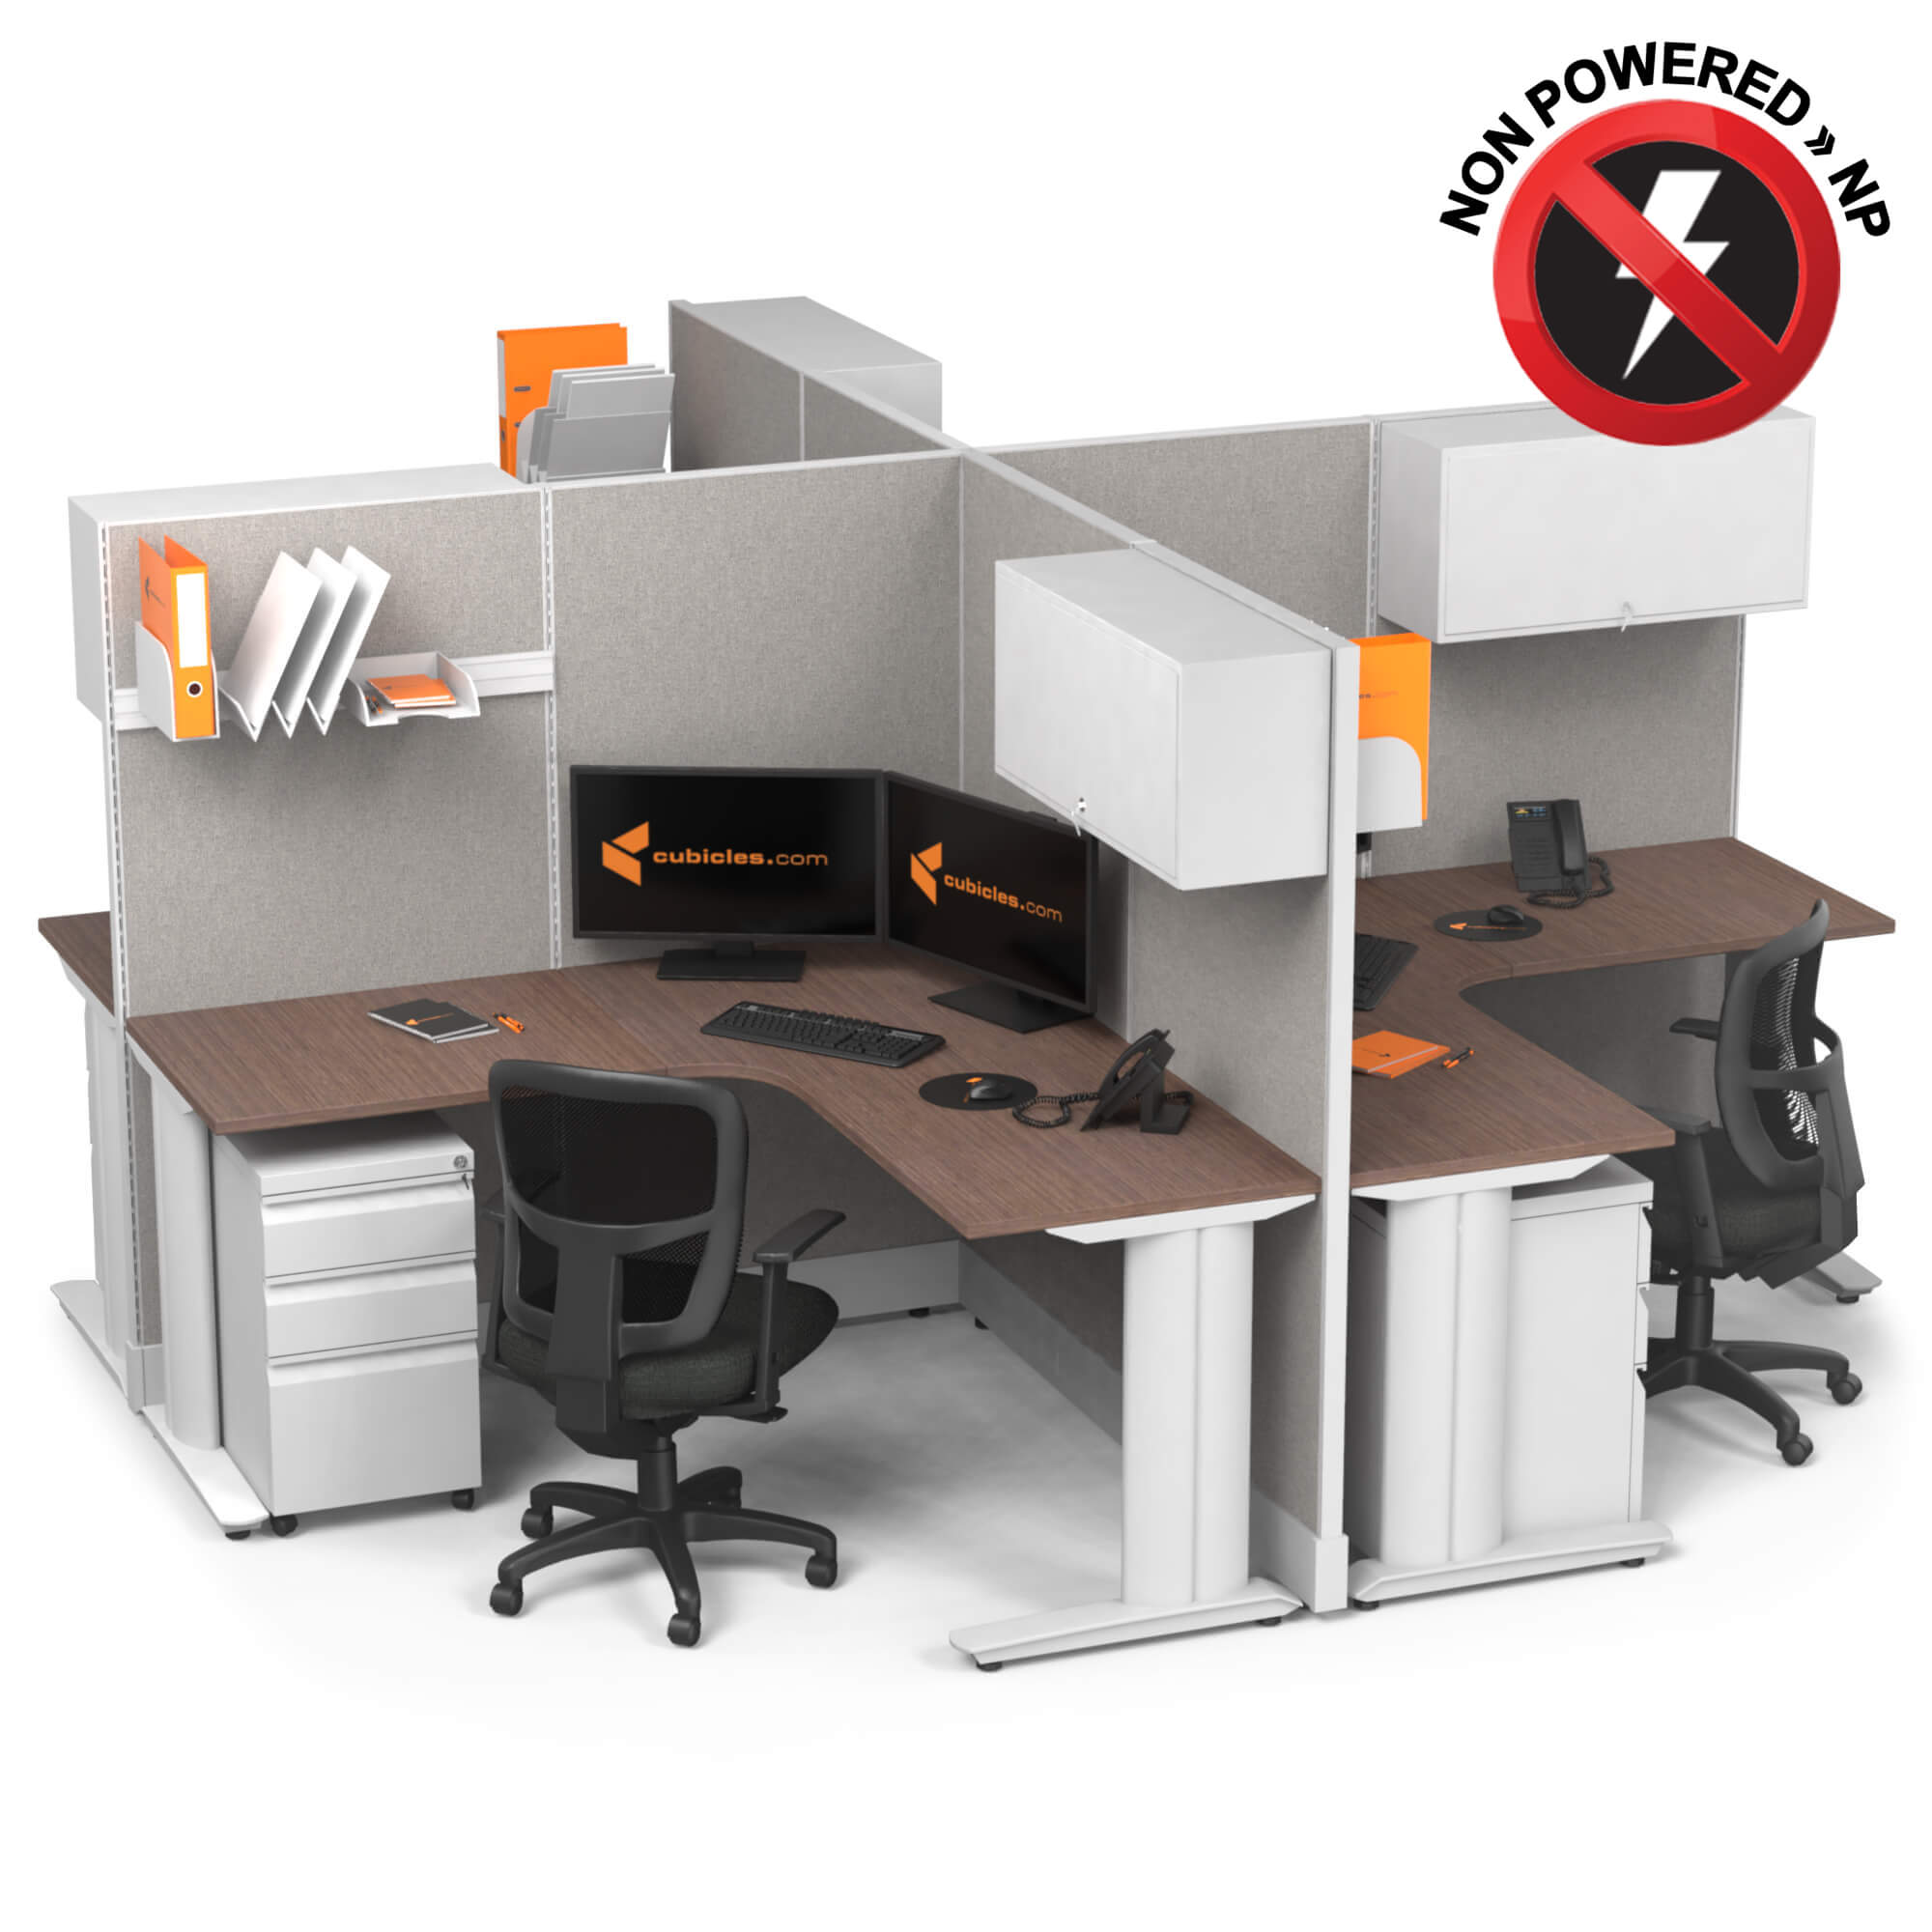 Cubicle desk x cluster workstation non powered with storage sign